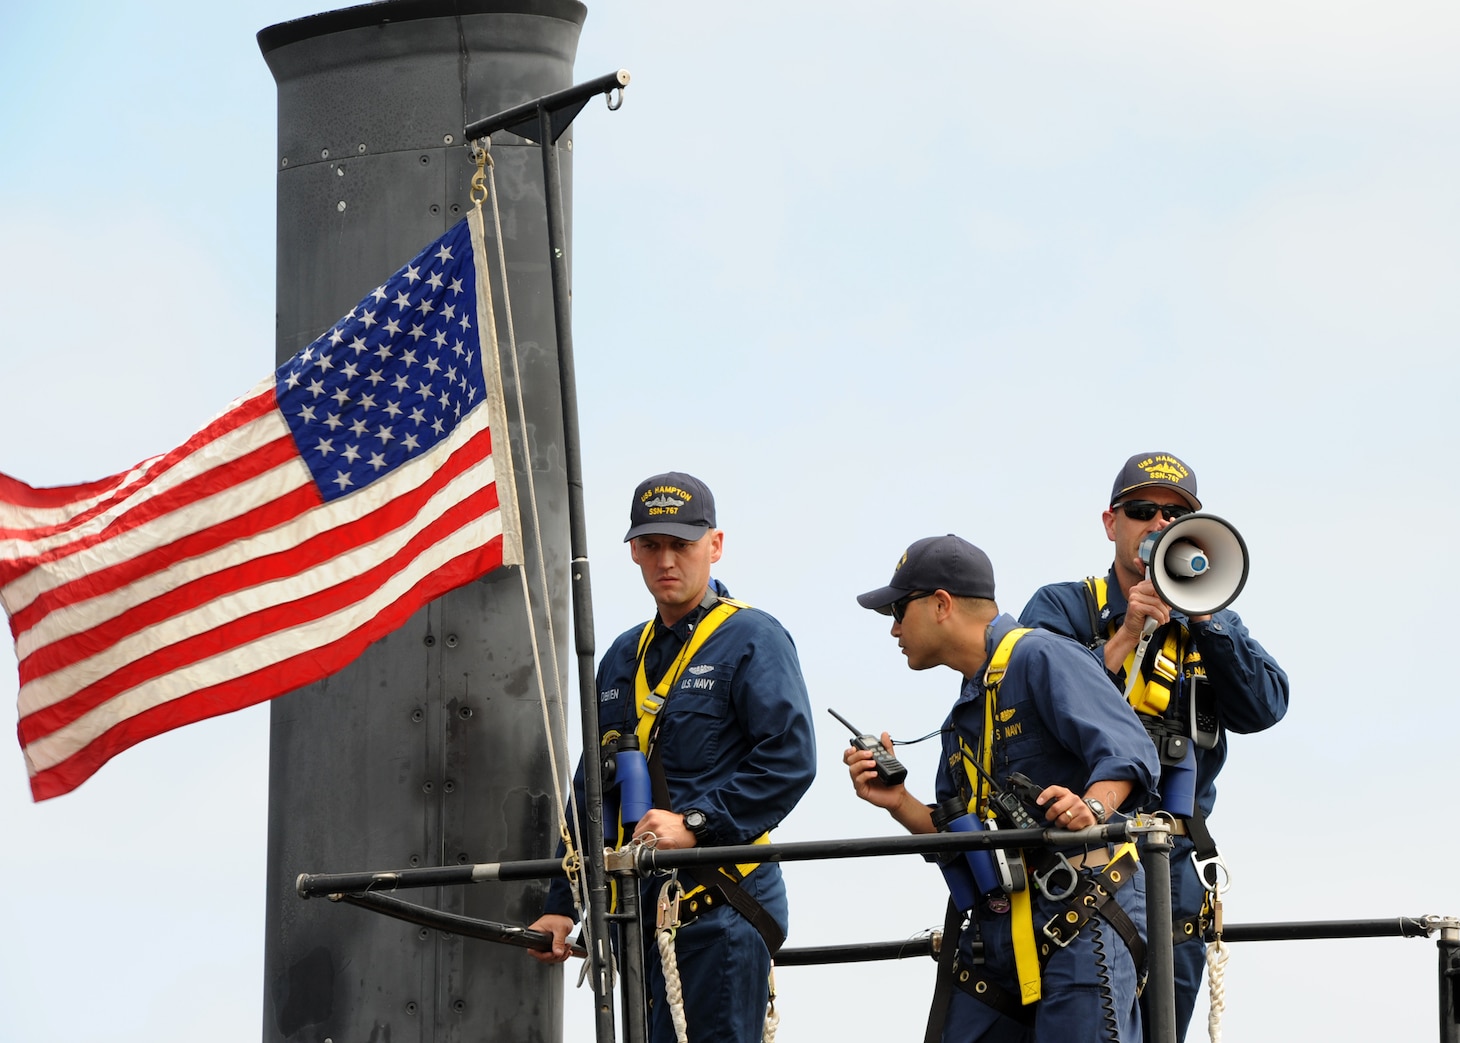 SAN DIEGO (June 18, 2013) Cmdr. Lincoln Reifsteck, commanding officer of the Los Angeles-class attack submarine USS Hampton (SSN 767), stands on the conning tower as the boat departs for a scheduled six-month deployment to the western Pacific region in support of the Chief of Naval Operations' Maritime Strategy, which includes maritime security, forward presence, sea control, and power projection. Hampton was commissioned November 16, 1993 and is named after Hampton, Iowa, S.C. and Va. Displacing more than 6,900 tons, Hampton has a crew of nearly 140 Sailors and is one of six Los Angeles-class, fast-attack submarines homeported in San Diego. U.S. Navy photo by Mass Communication Specialist 2nd Class Kyle Carlstrom. (Released)